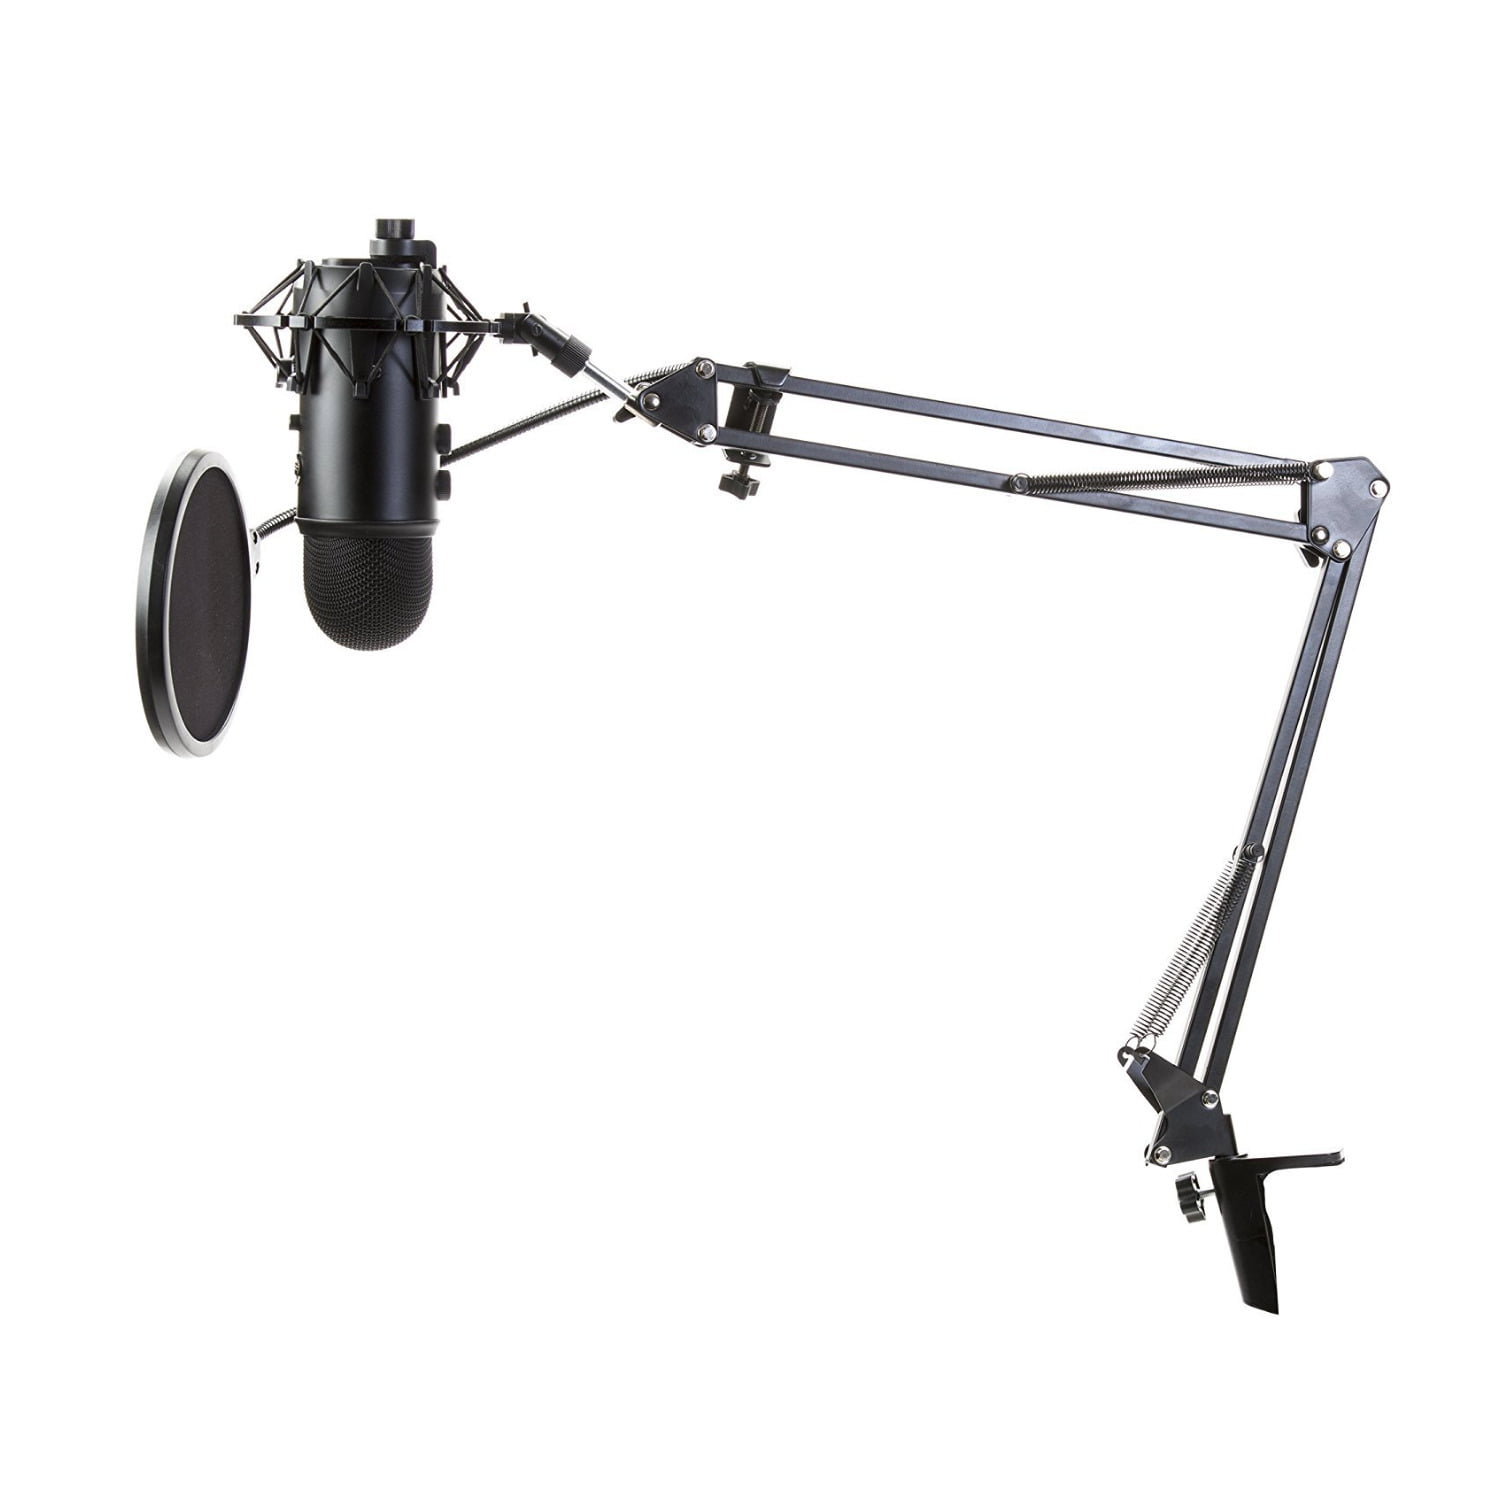 Blue Microphone (Blackout) with Boom Arm Stand, Pop and Shock Mount